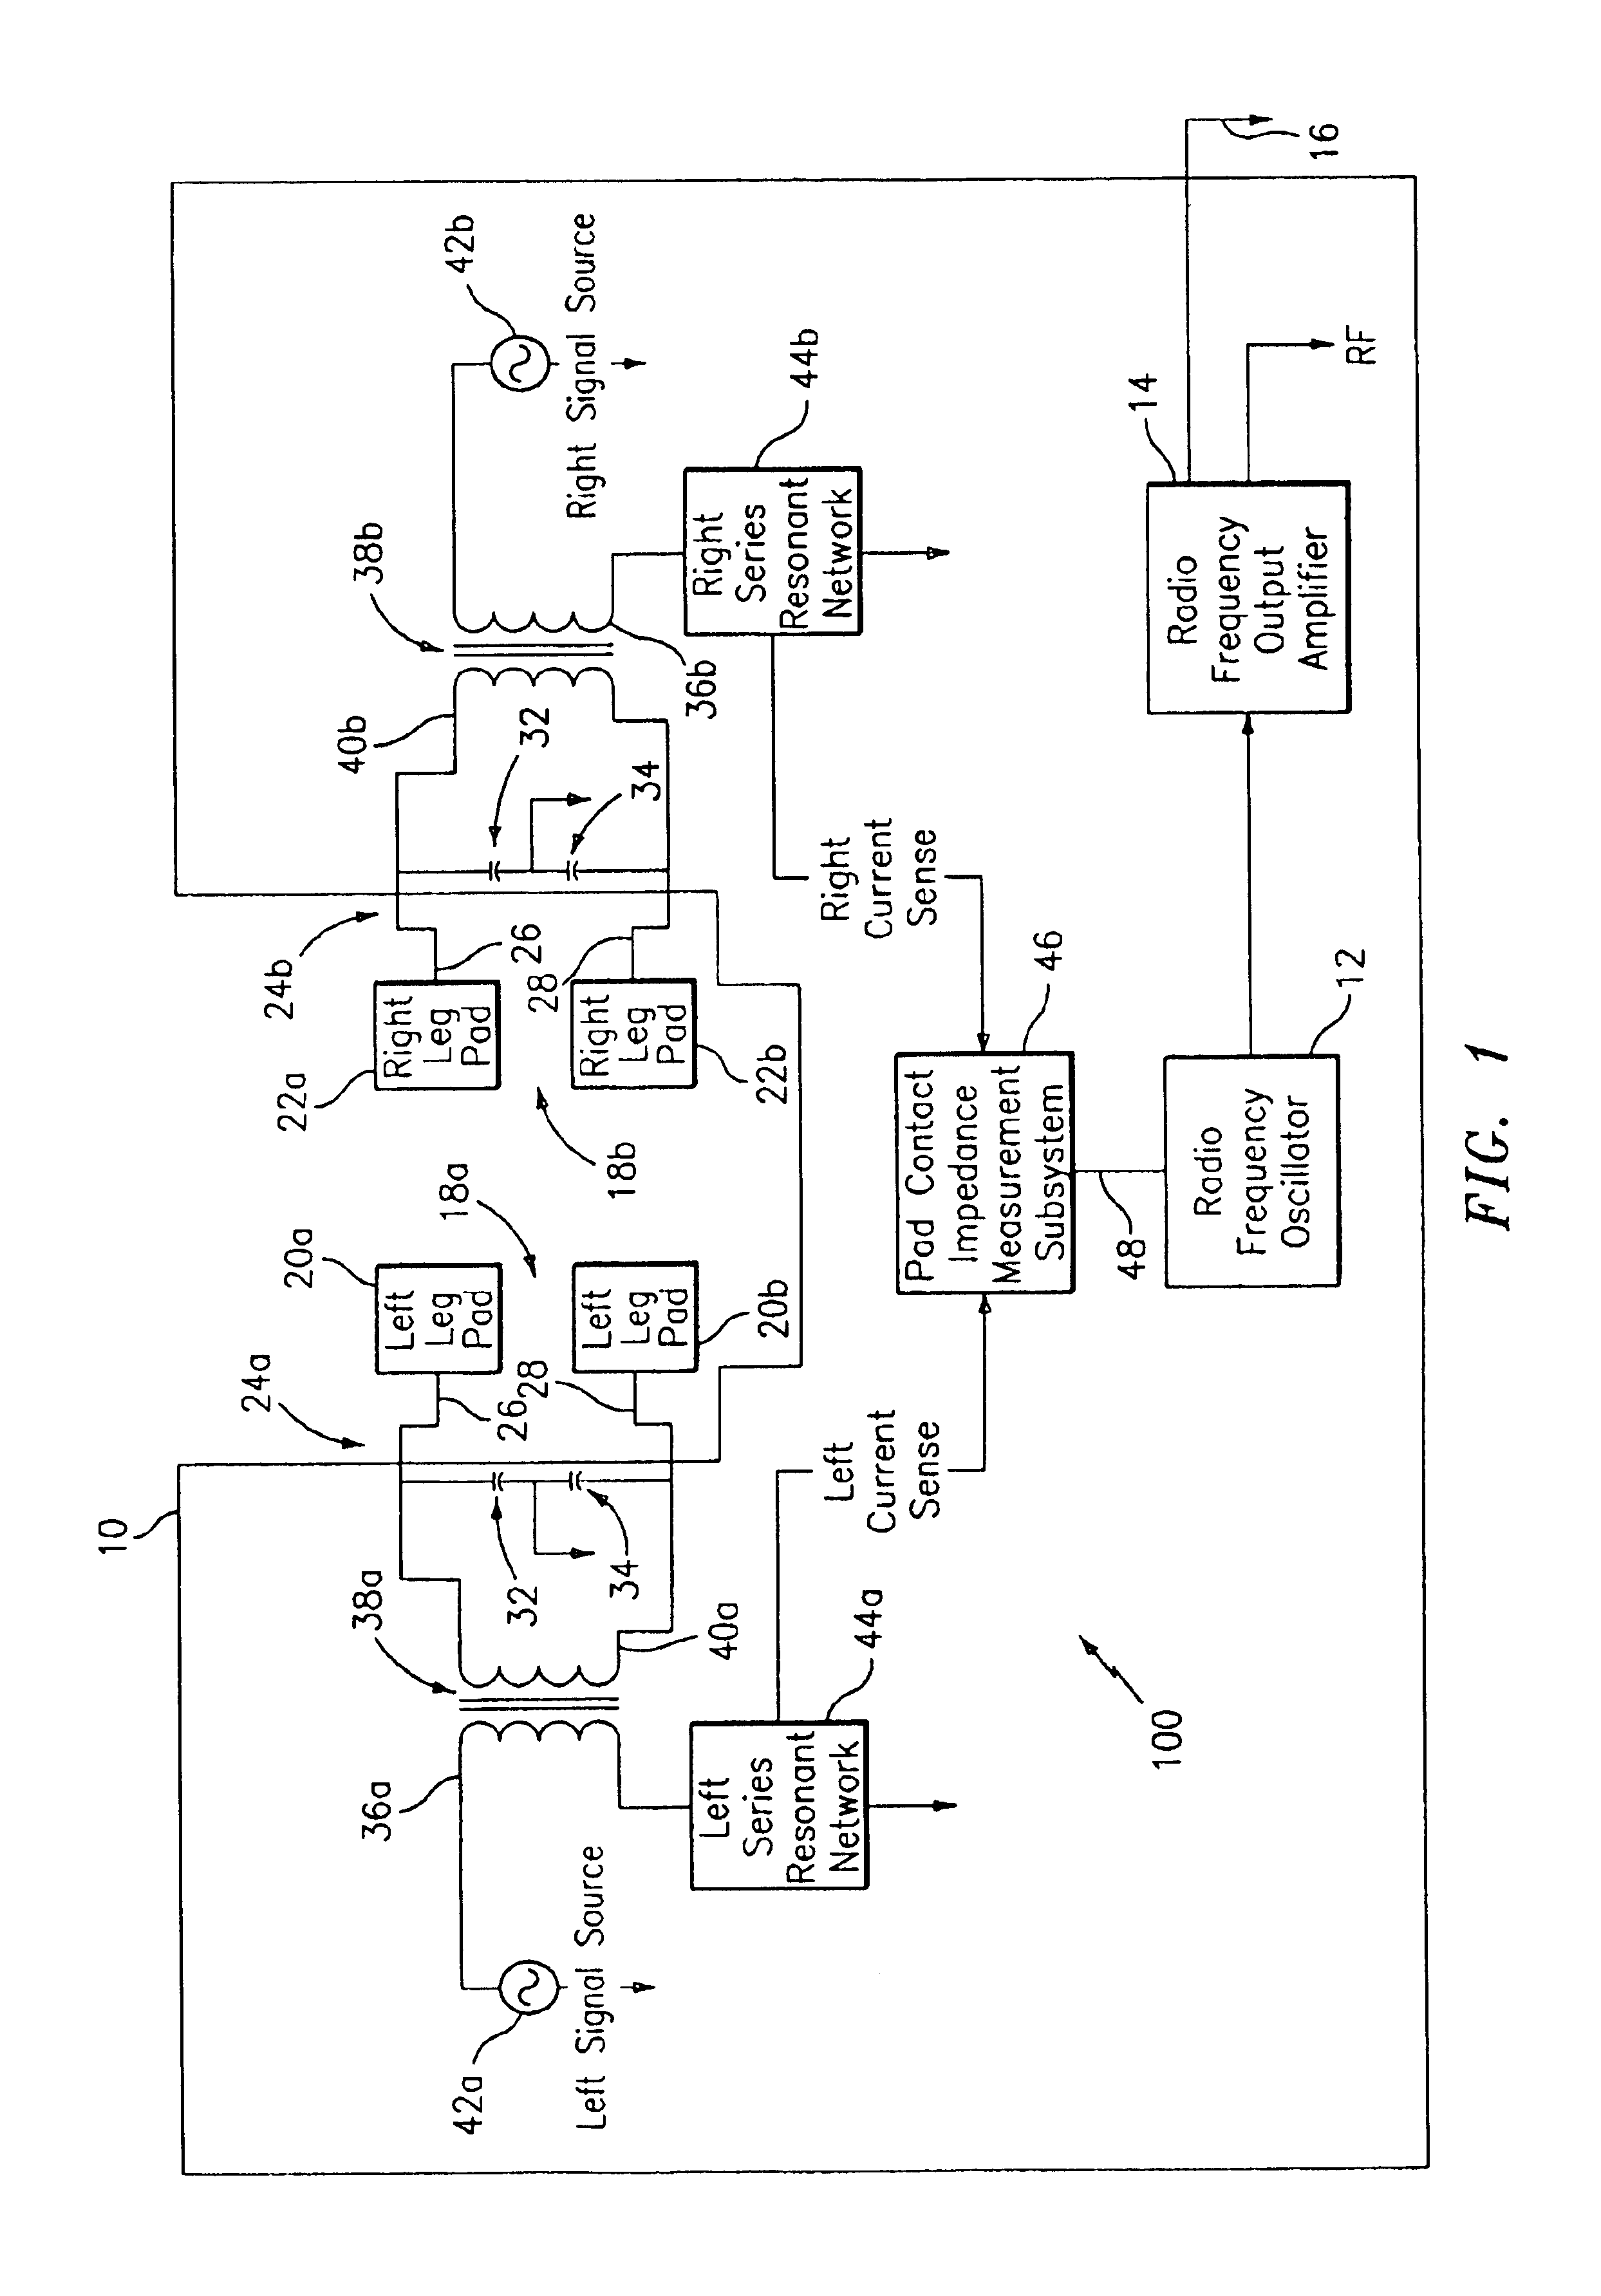 Multiple RF return pad contact detection system